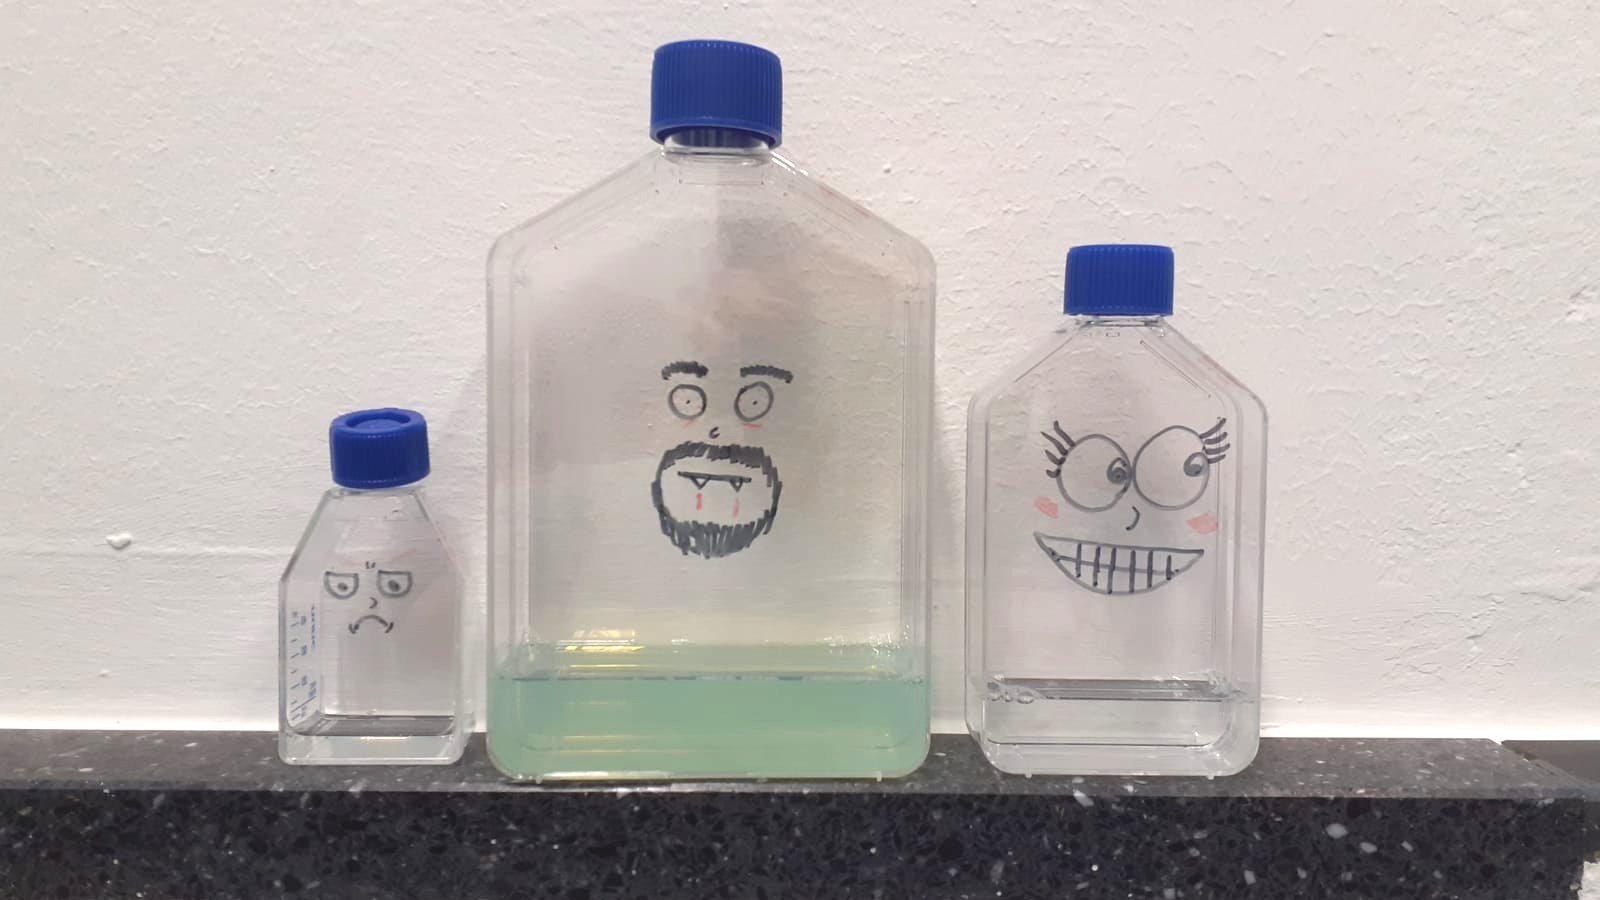 Three culture flasks with funny faces painted on